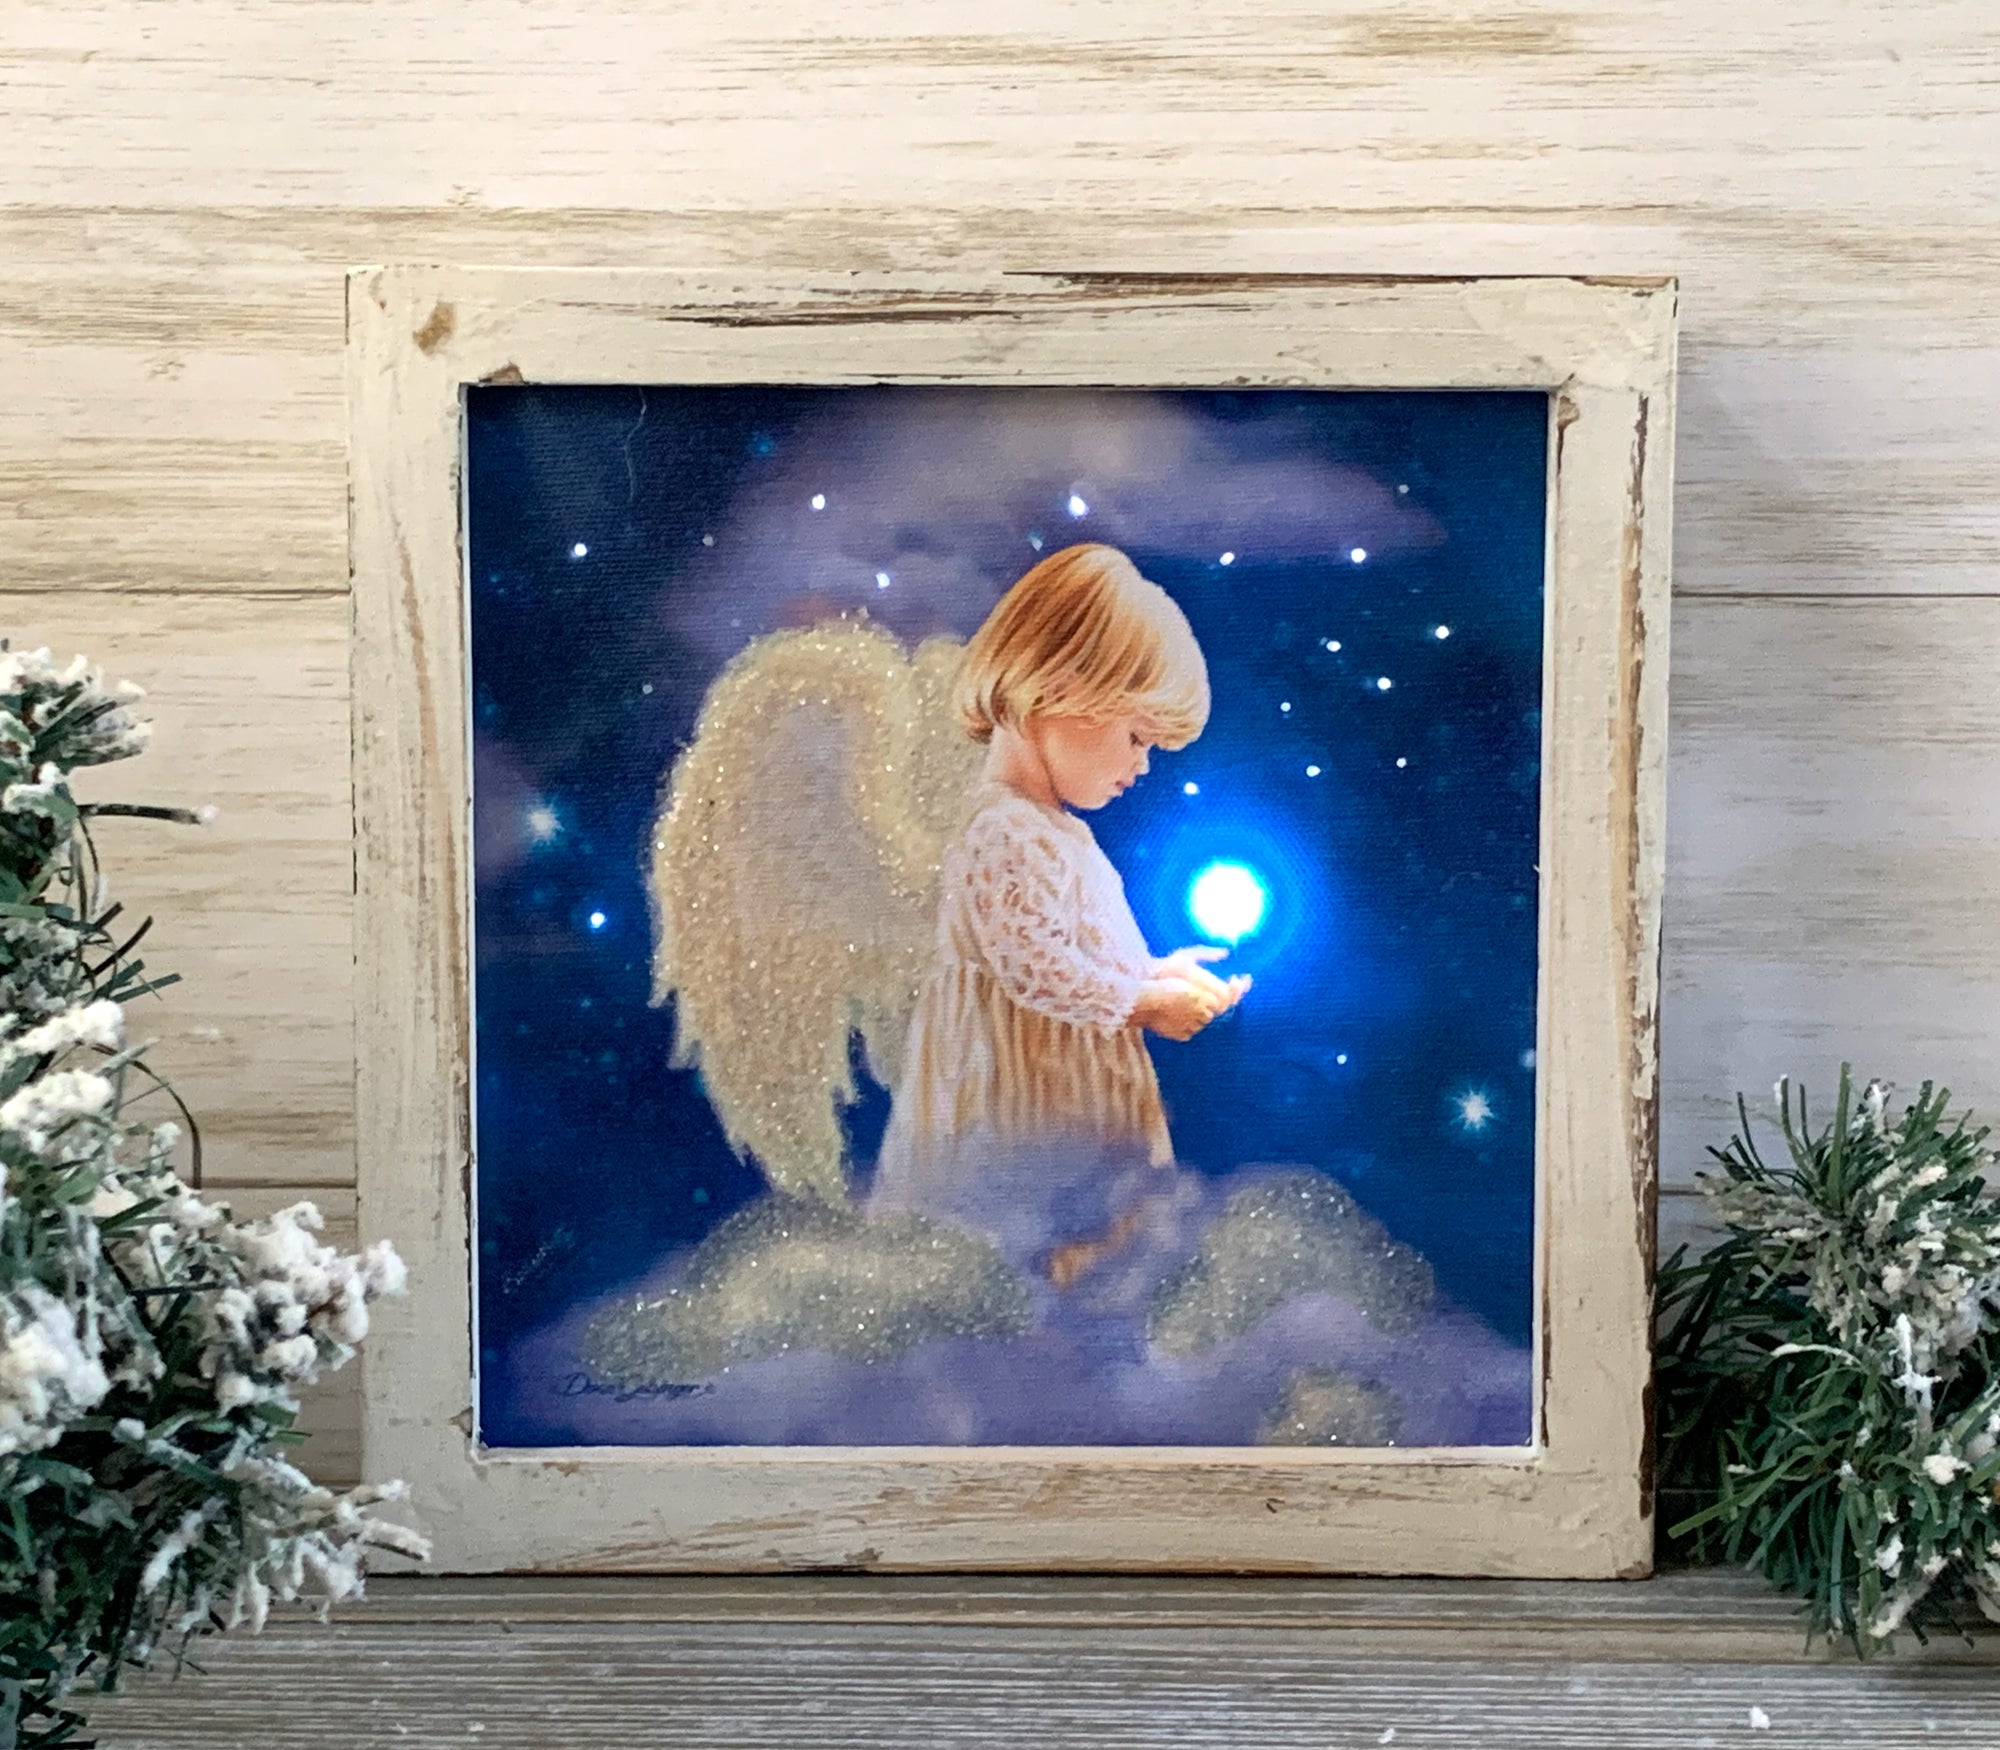 Featuring a young angel with glitter-covered wings and a bright light in her hand, this stunning piece is sure to captivate the heart and inspire the imagination.  With its fiberoptic lights illuminating the background stars, the Angel Star Lighted Shadow Box creates a mesmerizing and dreamlike ambiance that will transport you to a world of romance and magic.